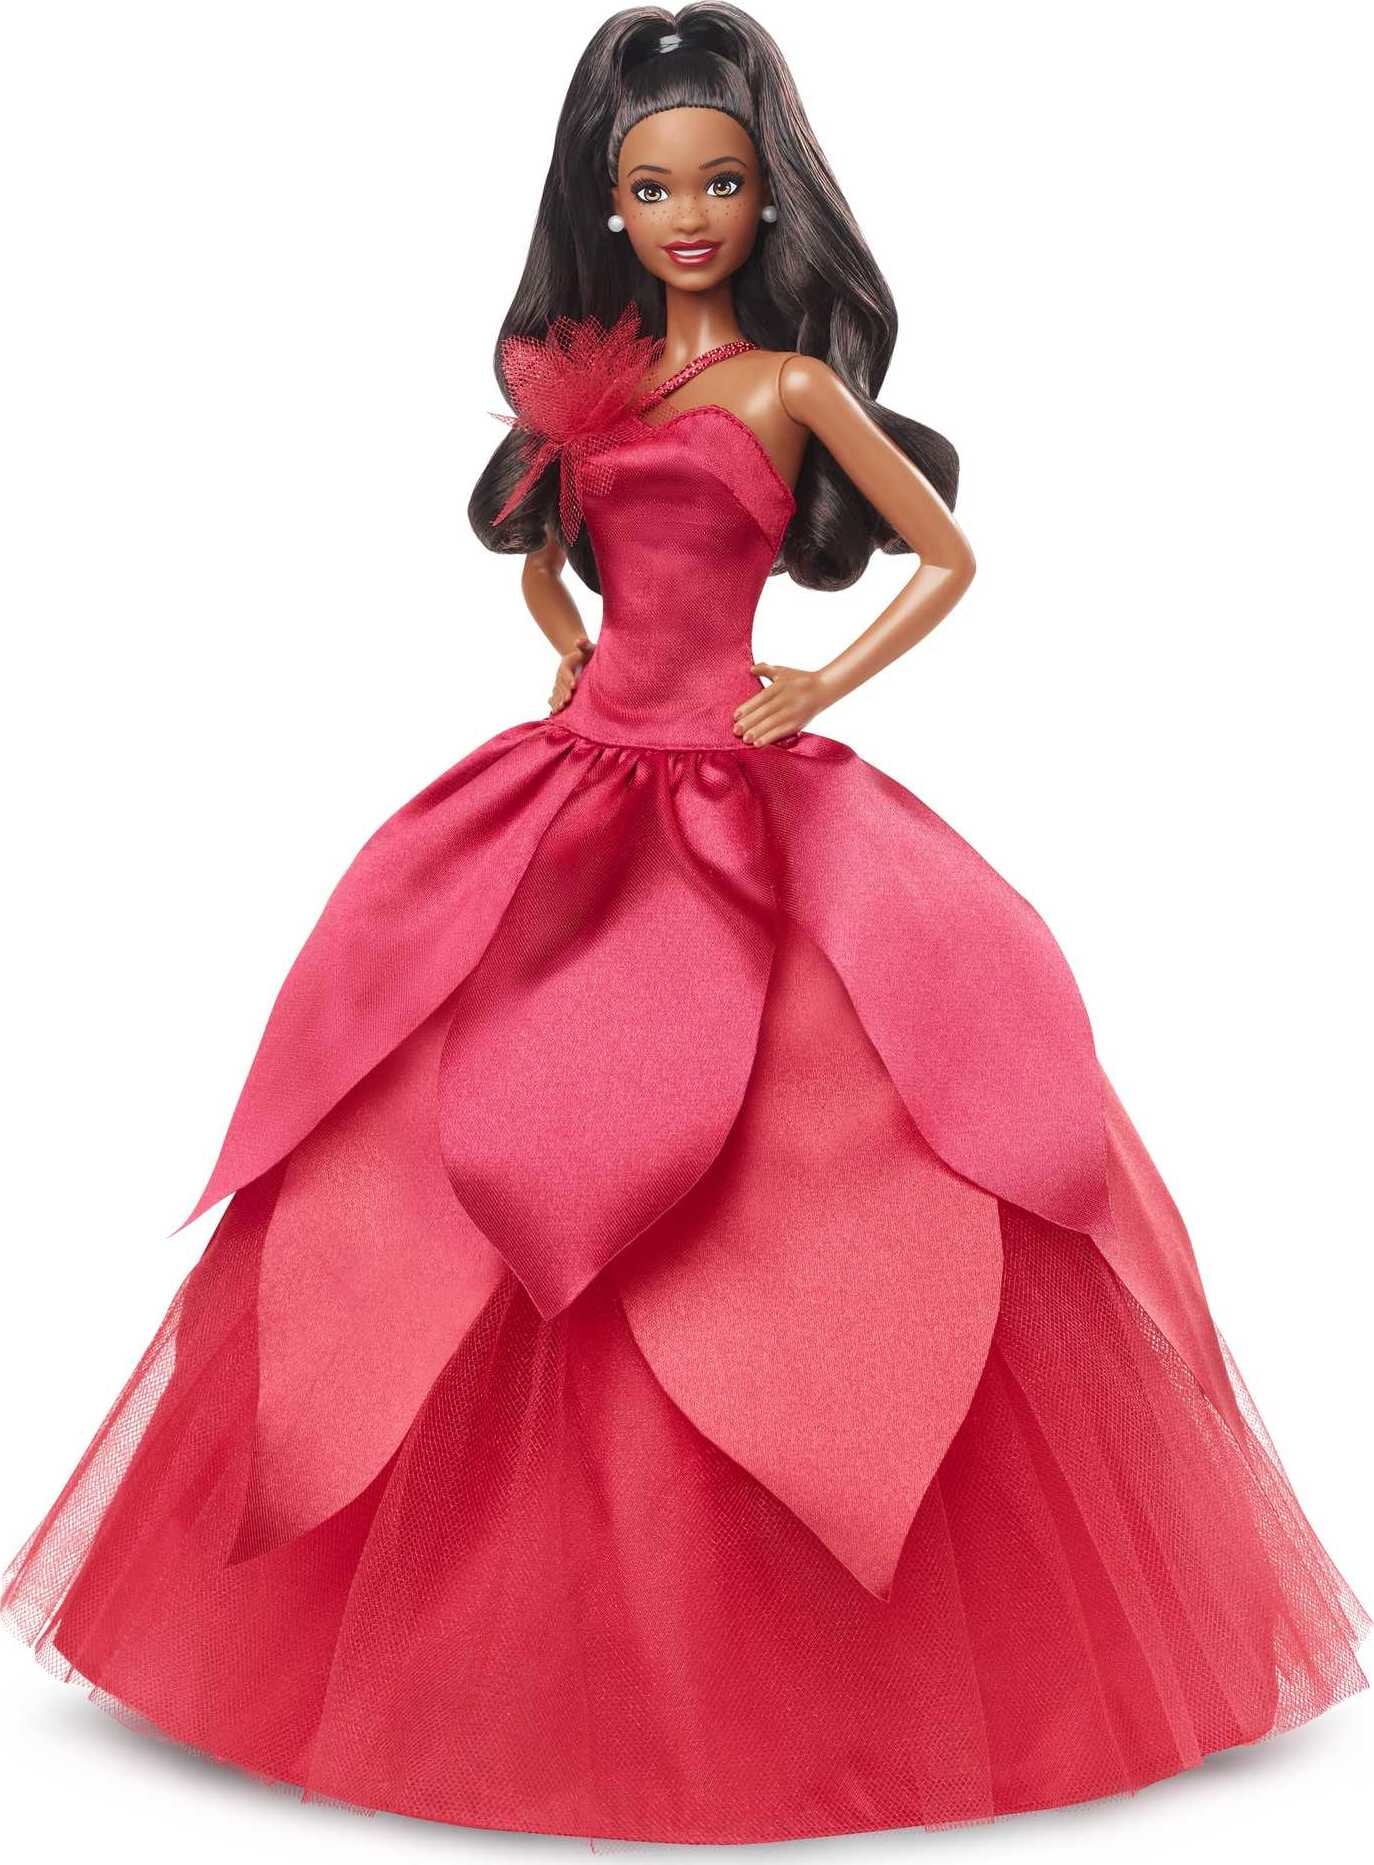 Set of 2 Marvelous Strapless Ball Gowns in Red and Brown Made to Fit Barbie Doll 